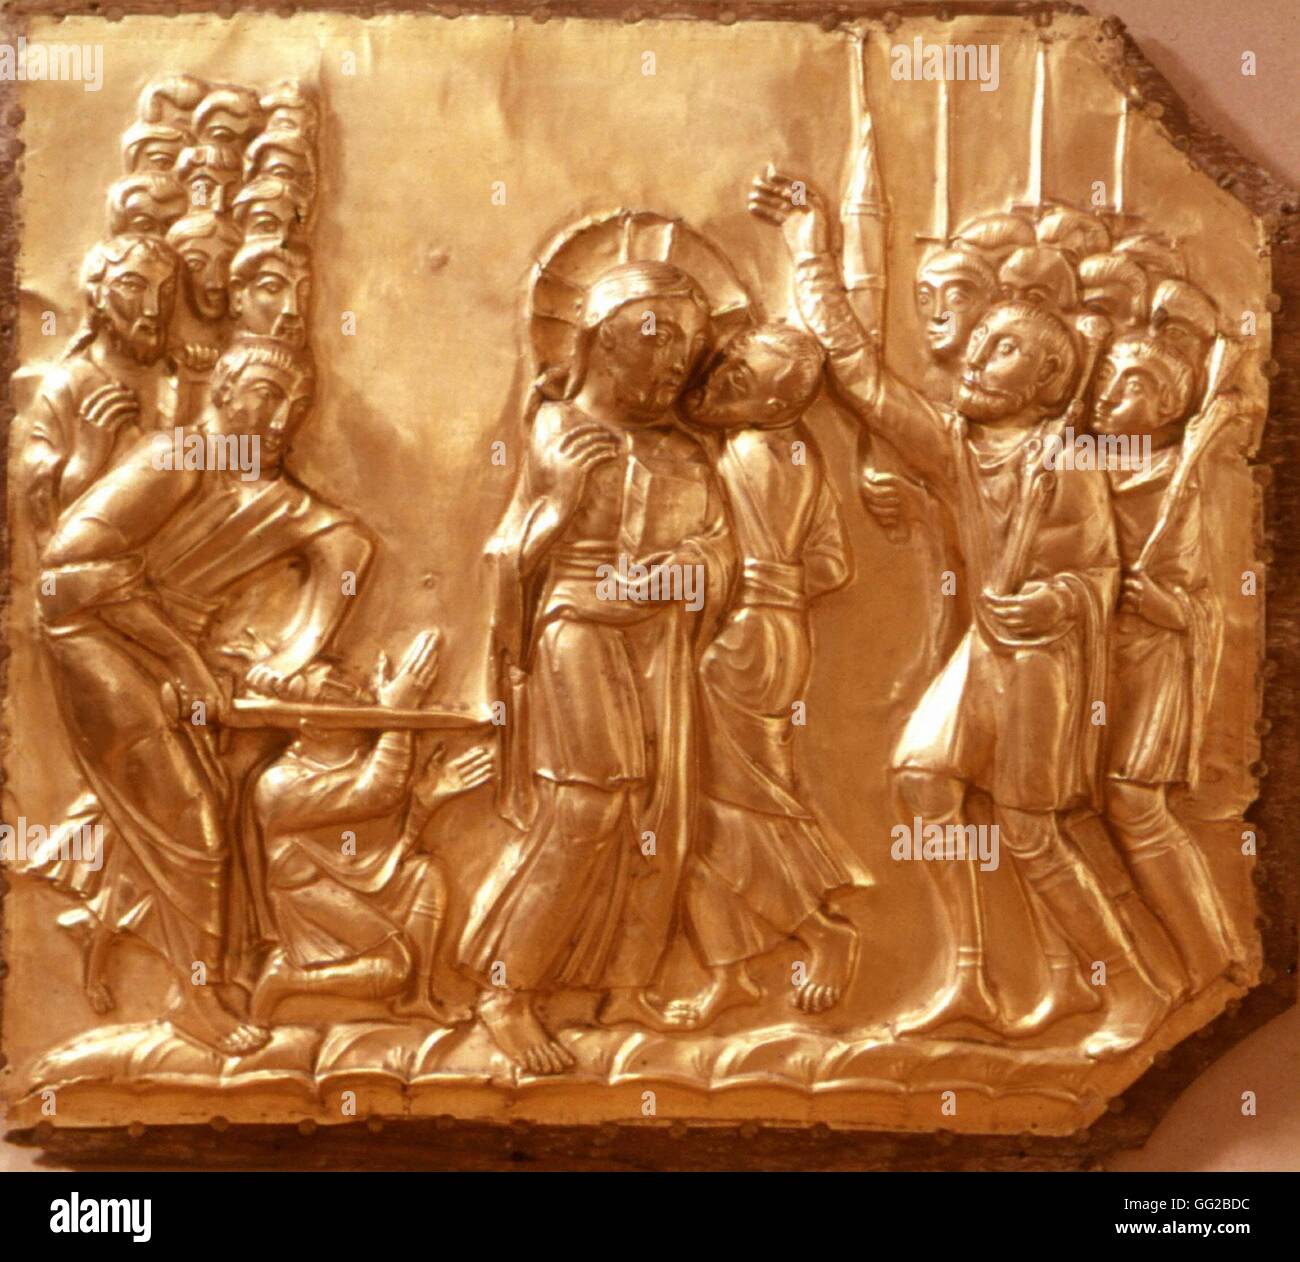 Altarpiece of the Aachen Cathedral in Germany (Pala d'oro). Detail of one of the Biblical scene of the Passion (here, Judas kiss) Golden altarpiece made between 1000 and 1020 and received as a gift from Otto III. Stock Photo